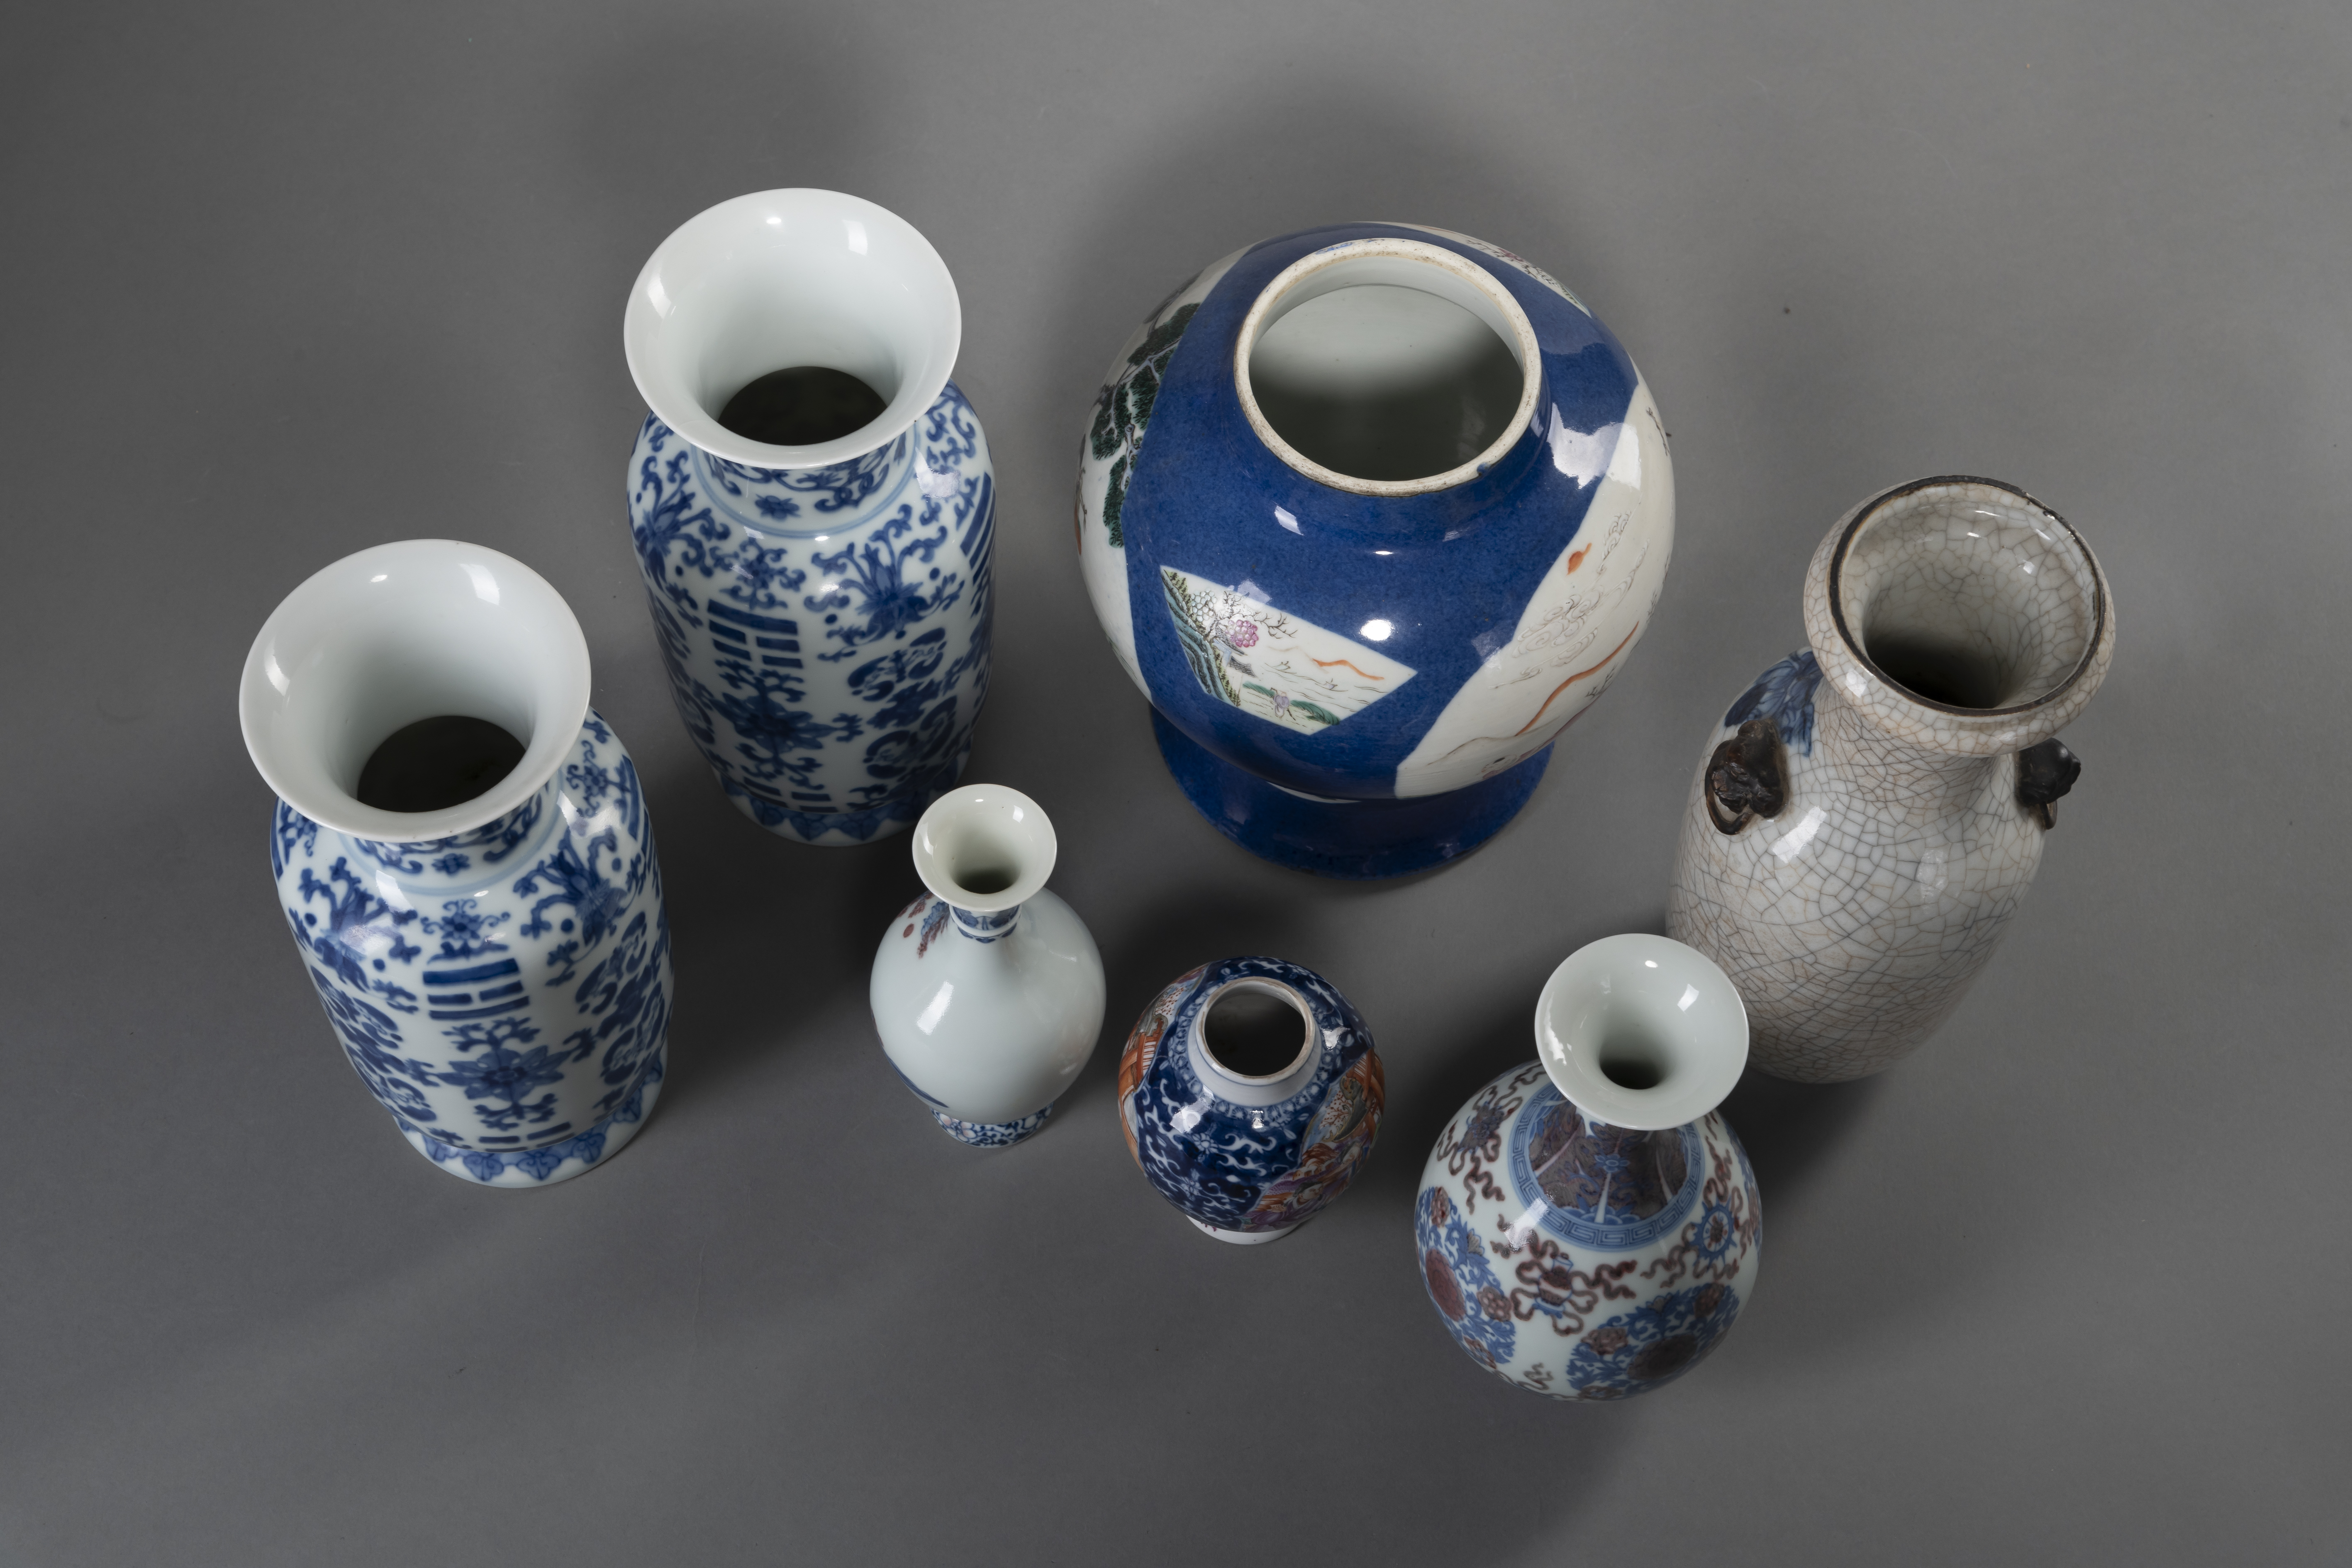 SEVEN BLUE AND WHITE PORCELAIN VASES SHOWING FIGURES, A LANDSCAPE, AND TRIGRAMS - Image 5 of 5